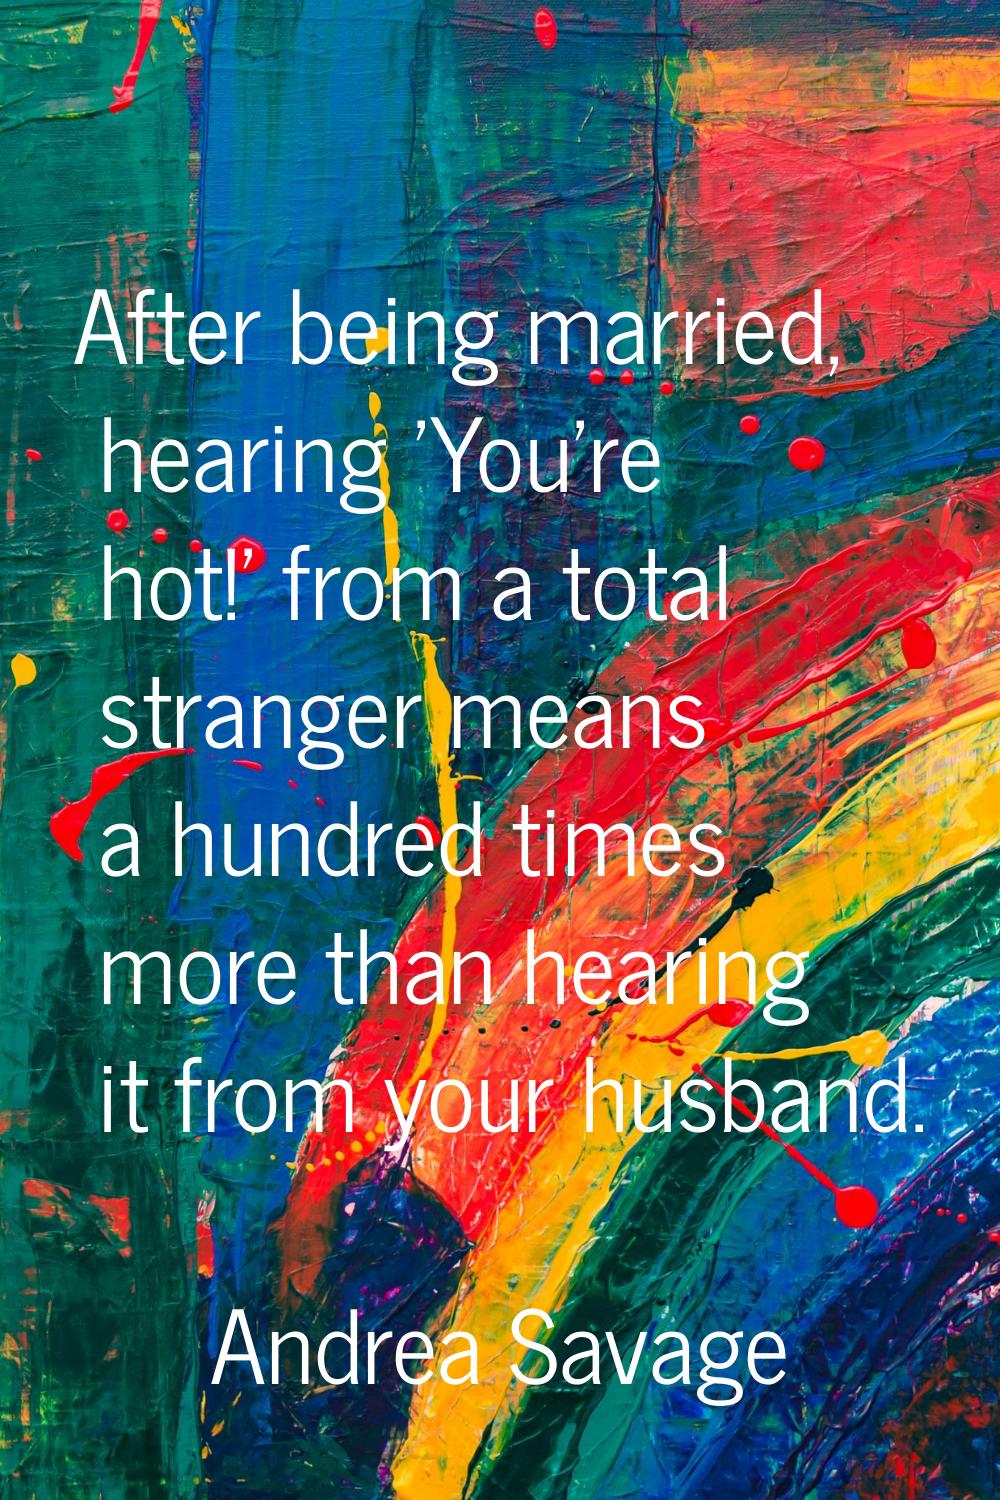 After being married, hearing 'You're hot!' from a total stranger means a hundred times more than he